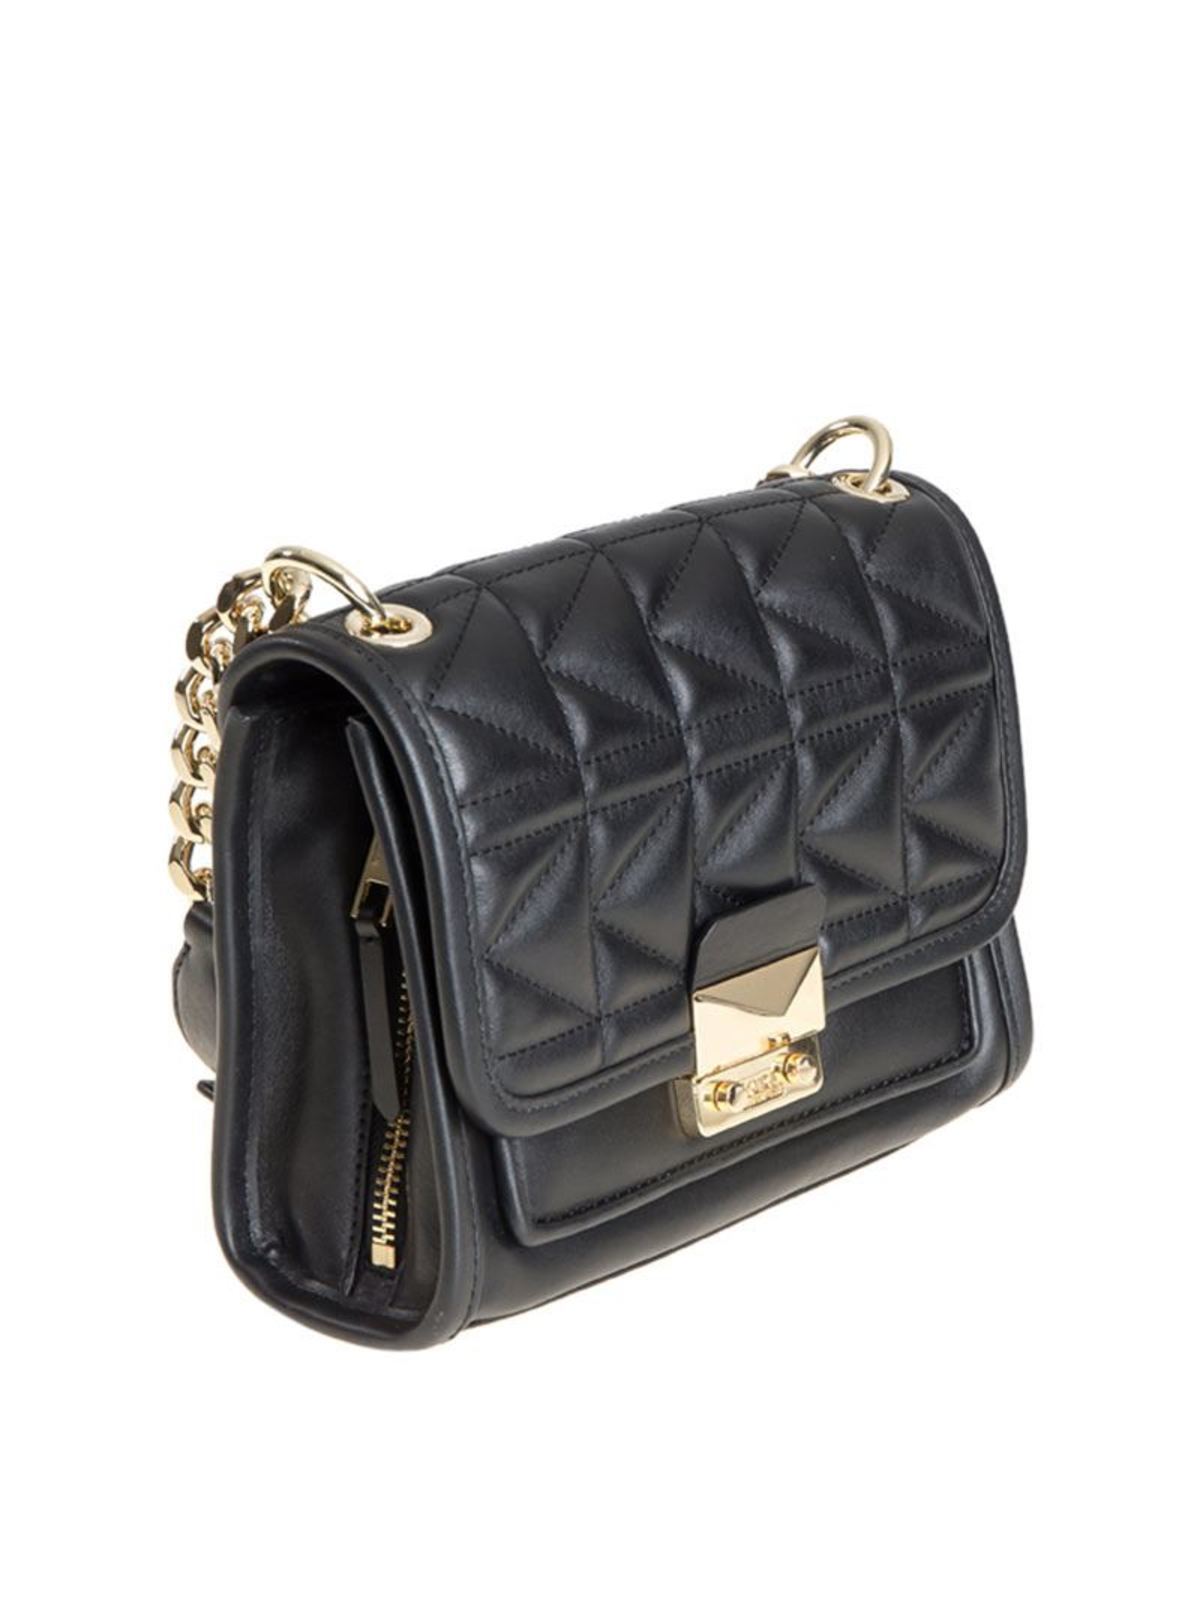 Cross body bags Karl Lagerfeld - Quilted leather bag - 76KW3081BLACKGOLD